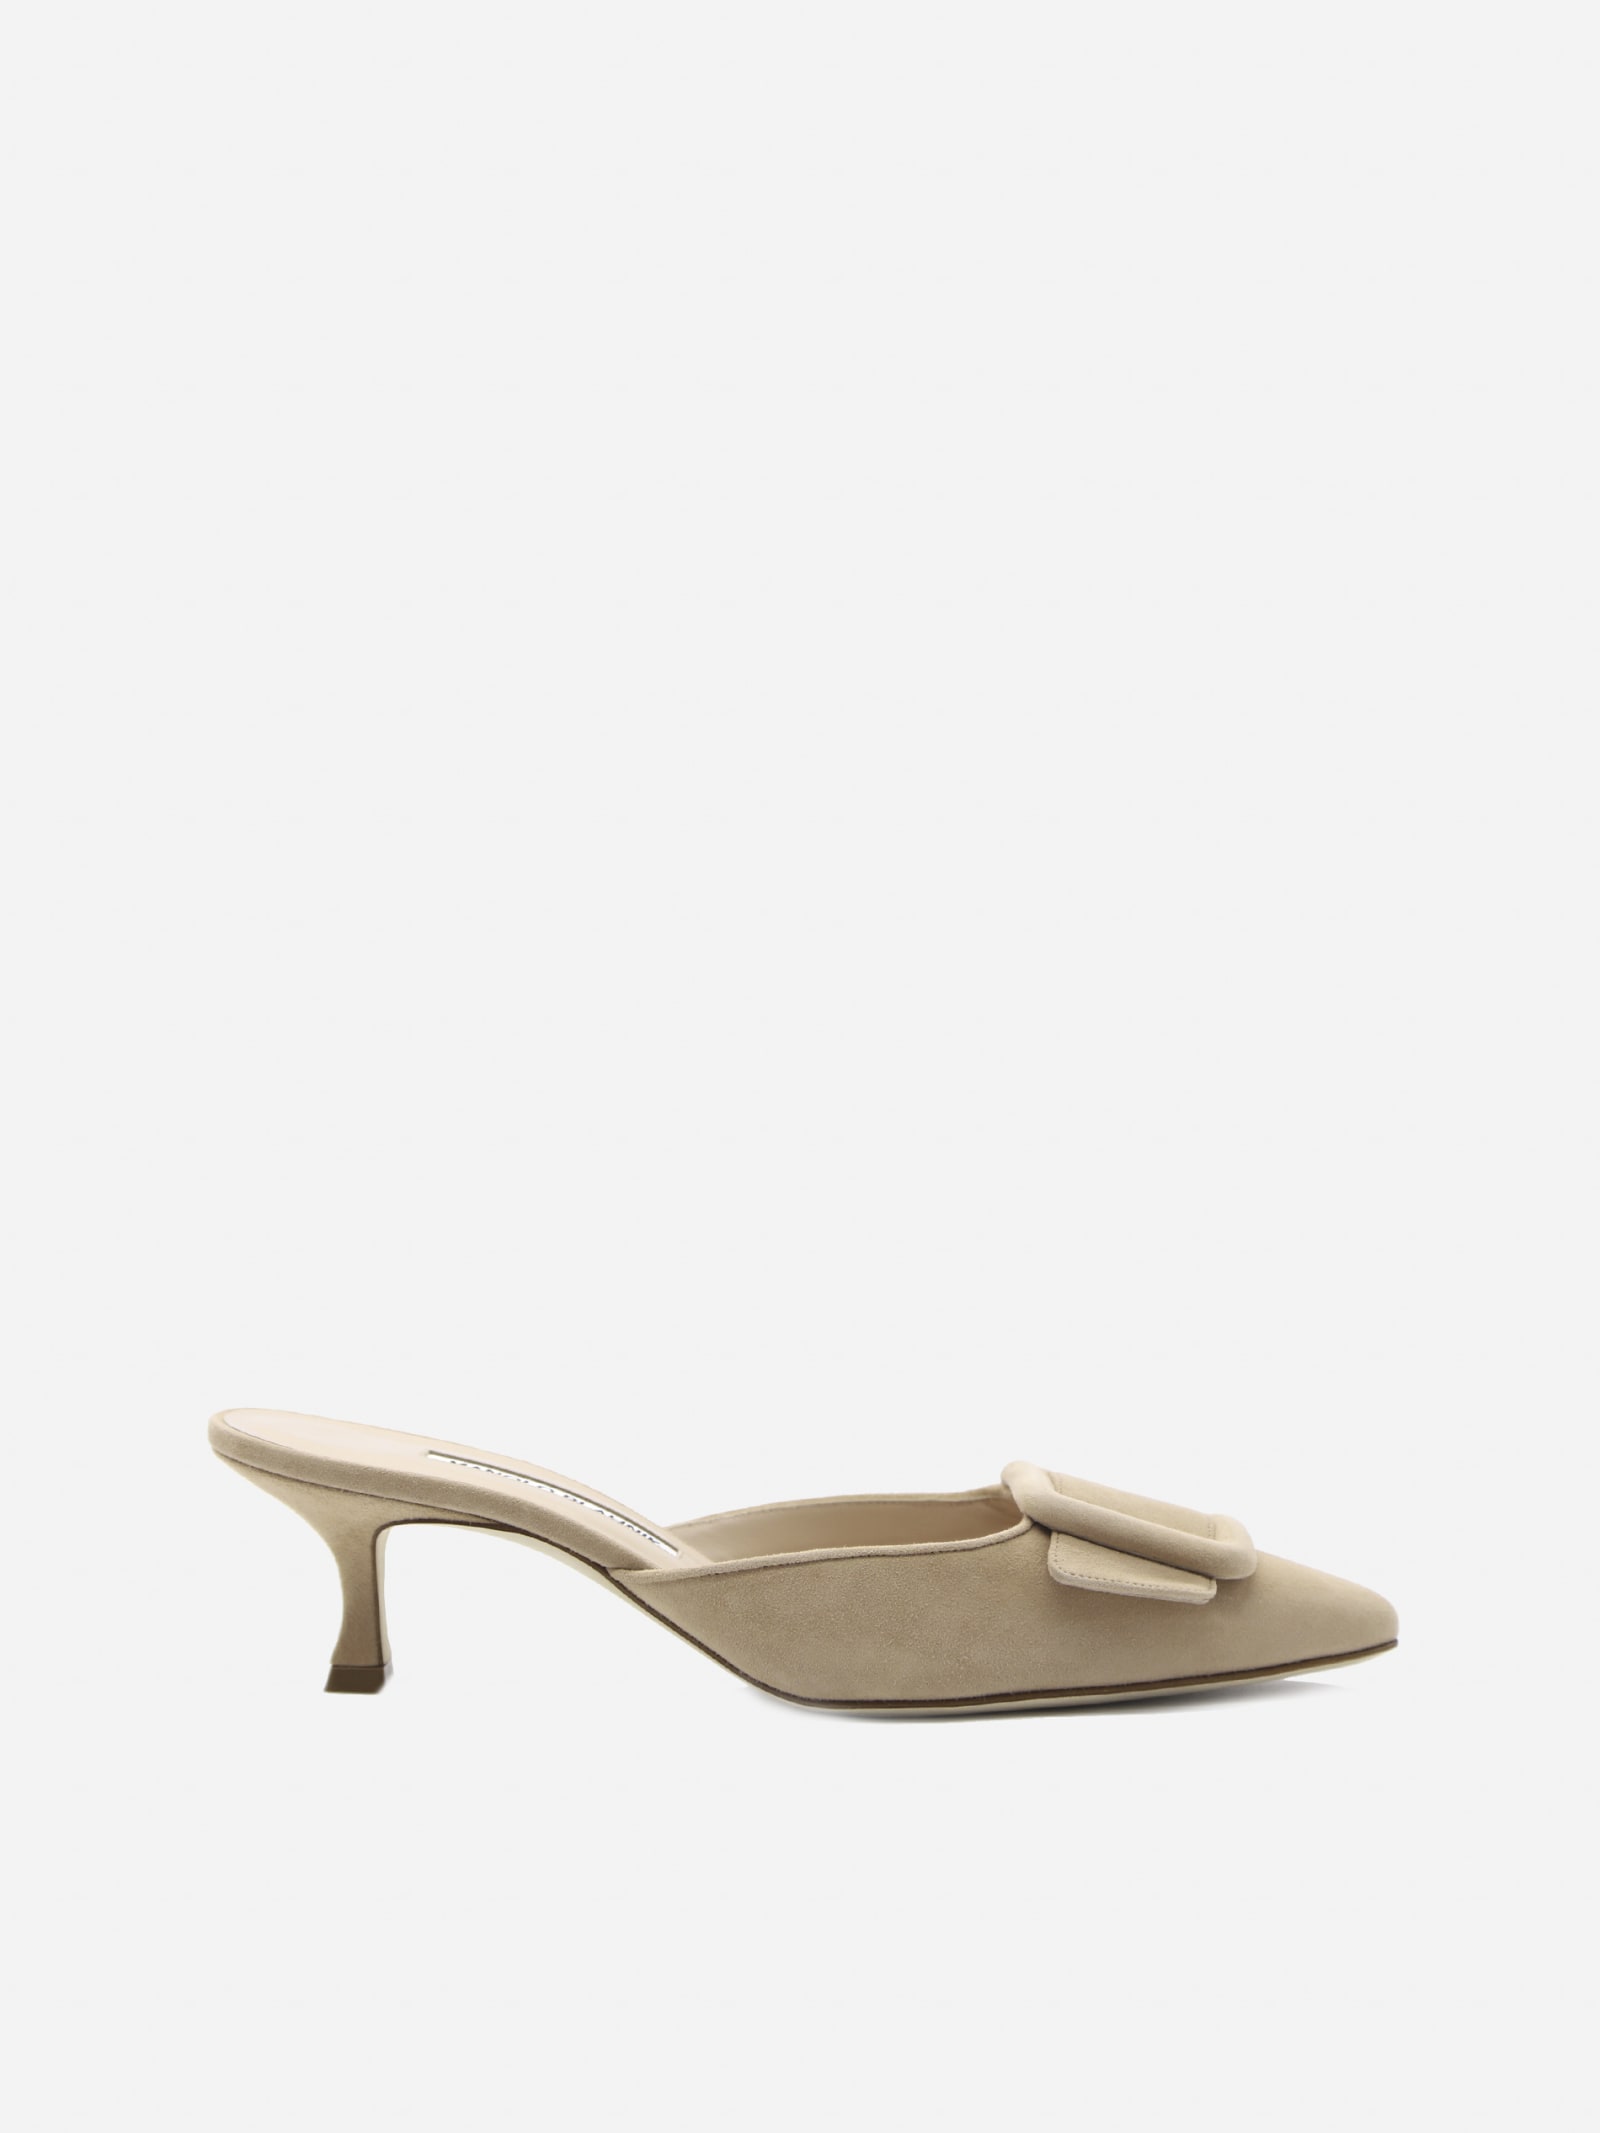 Manolo Blahnik Maysale Suede Mules With Decorative Buckle